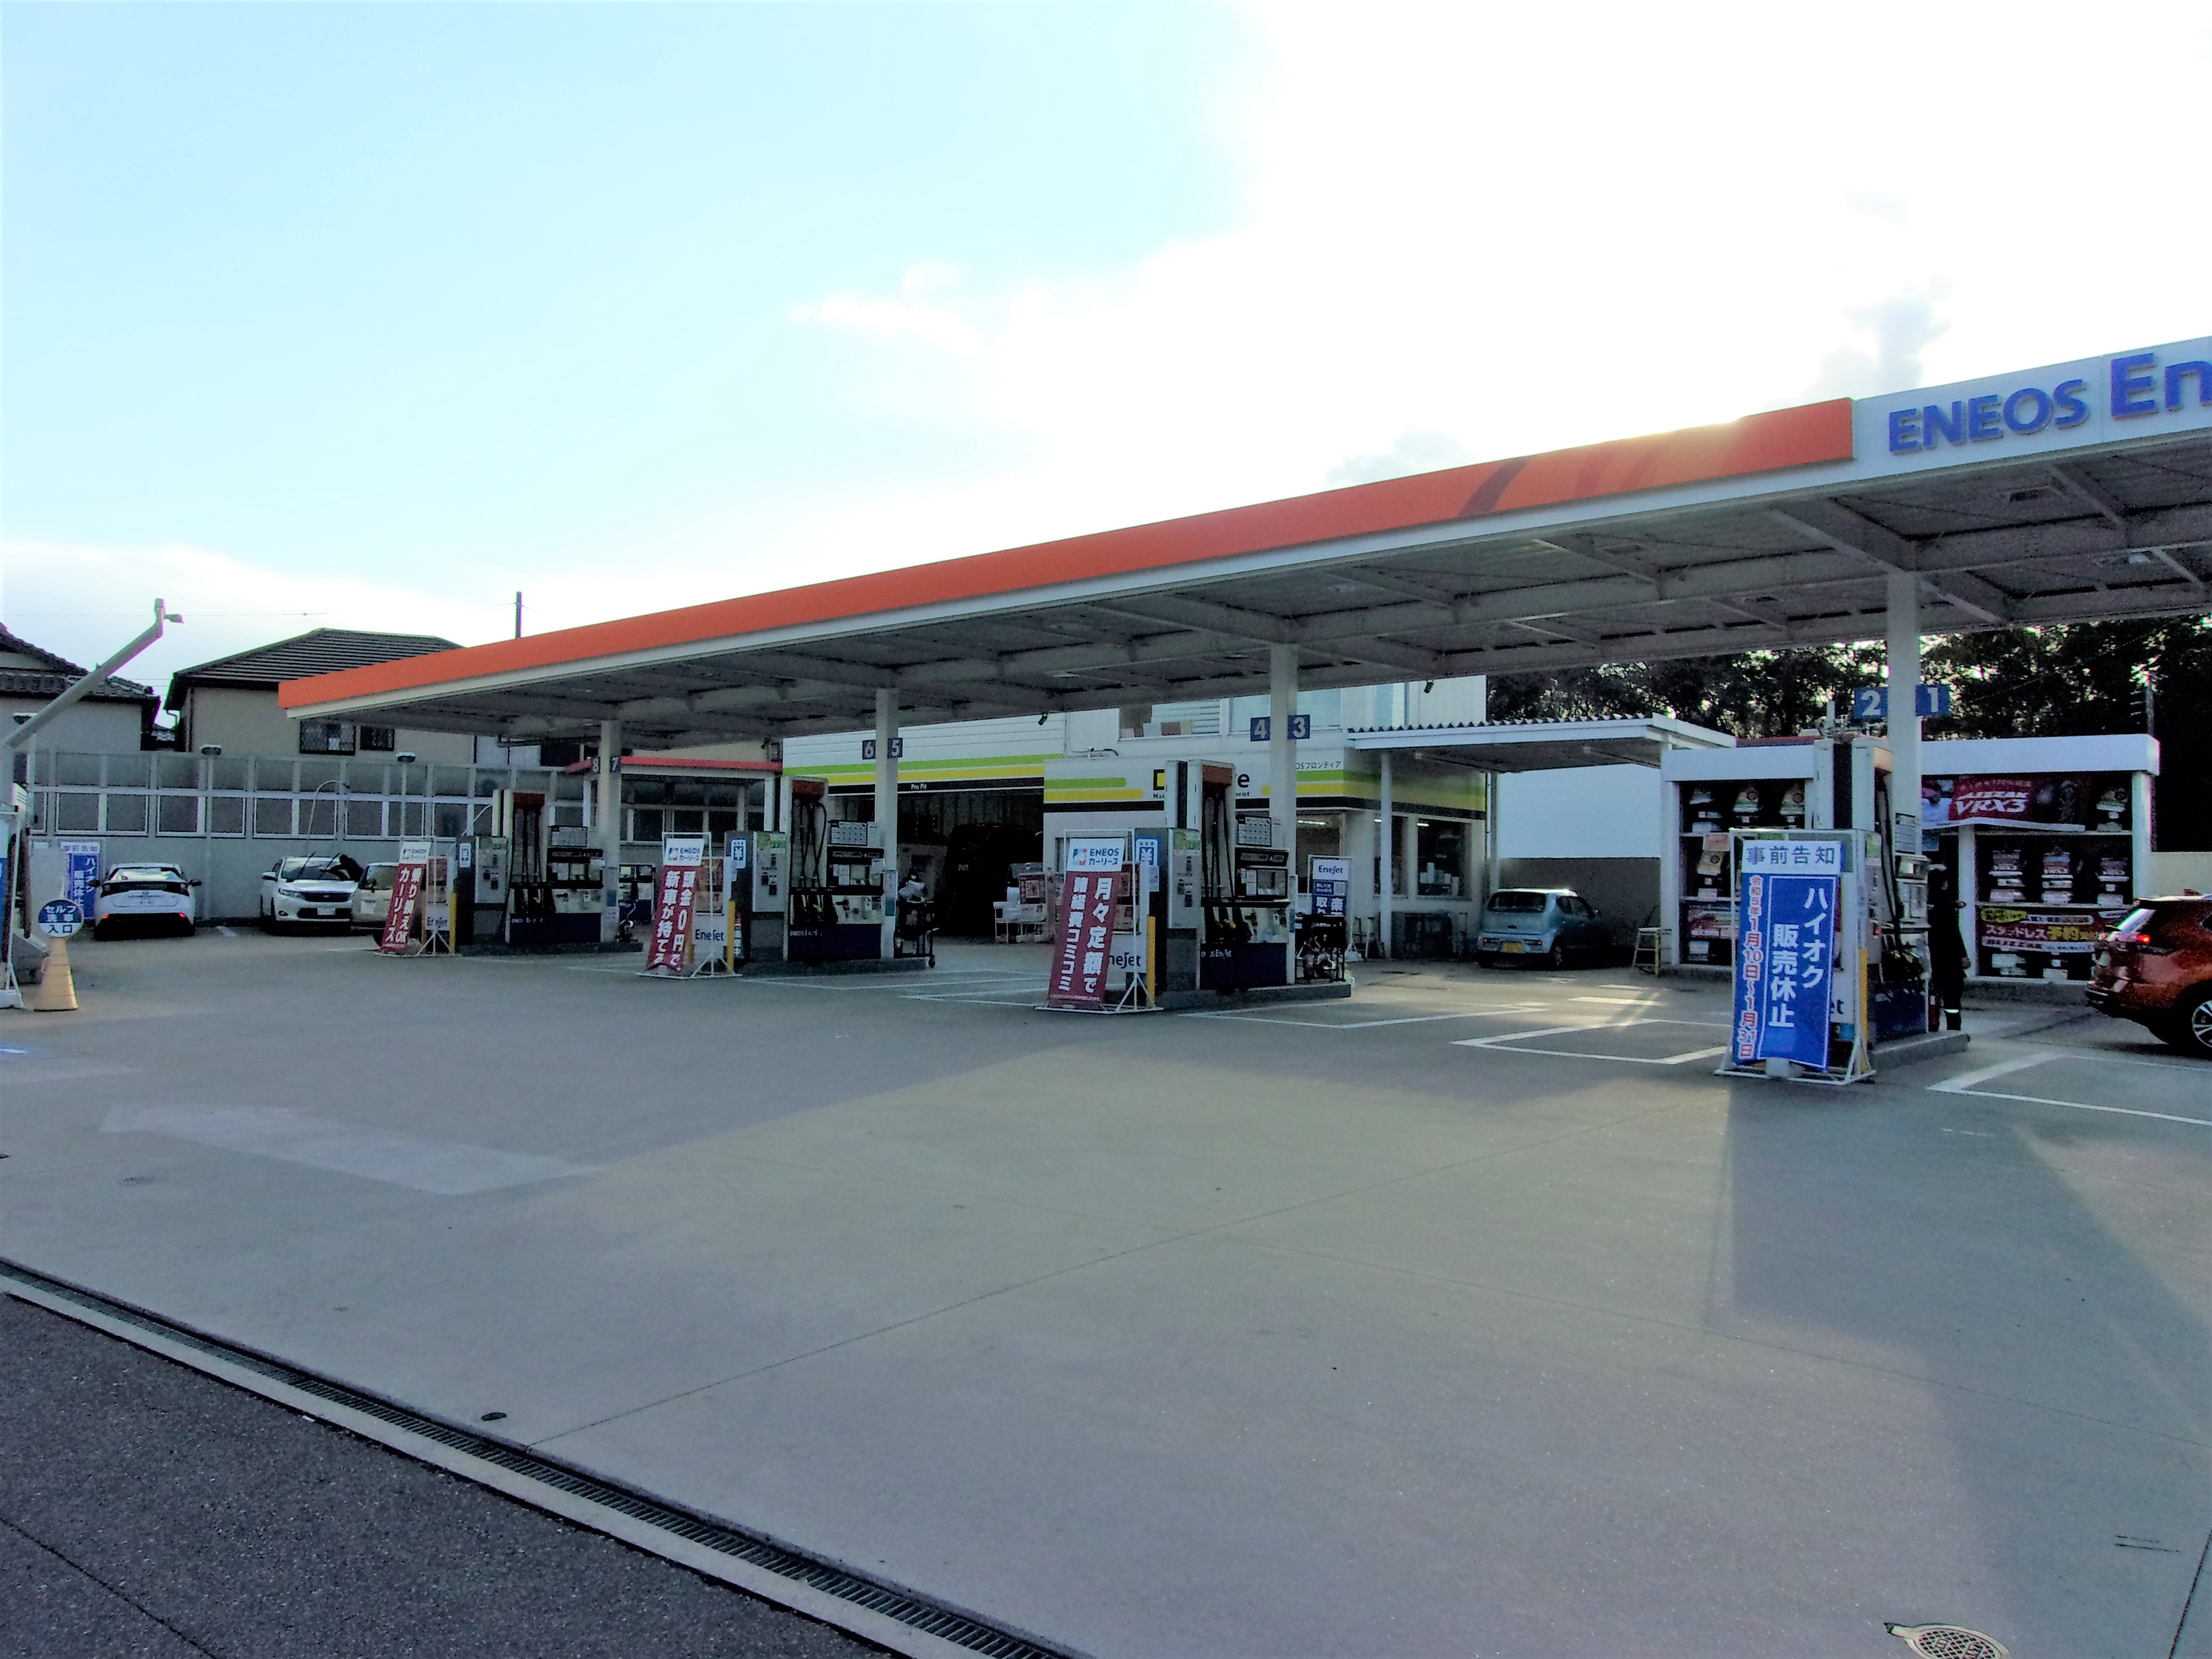 Images ENEOS Dr.Driveセルフ茨木店(ENEOSフロンティア)